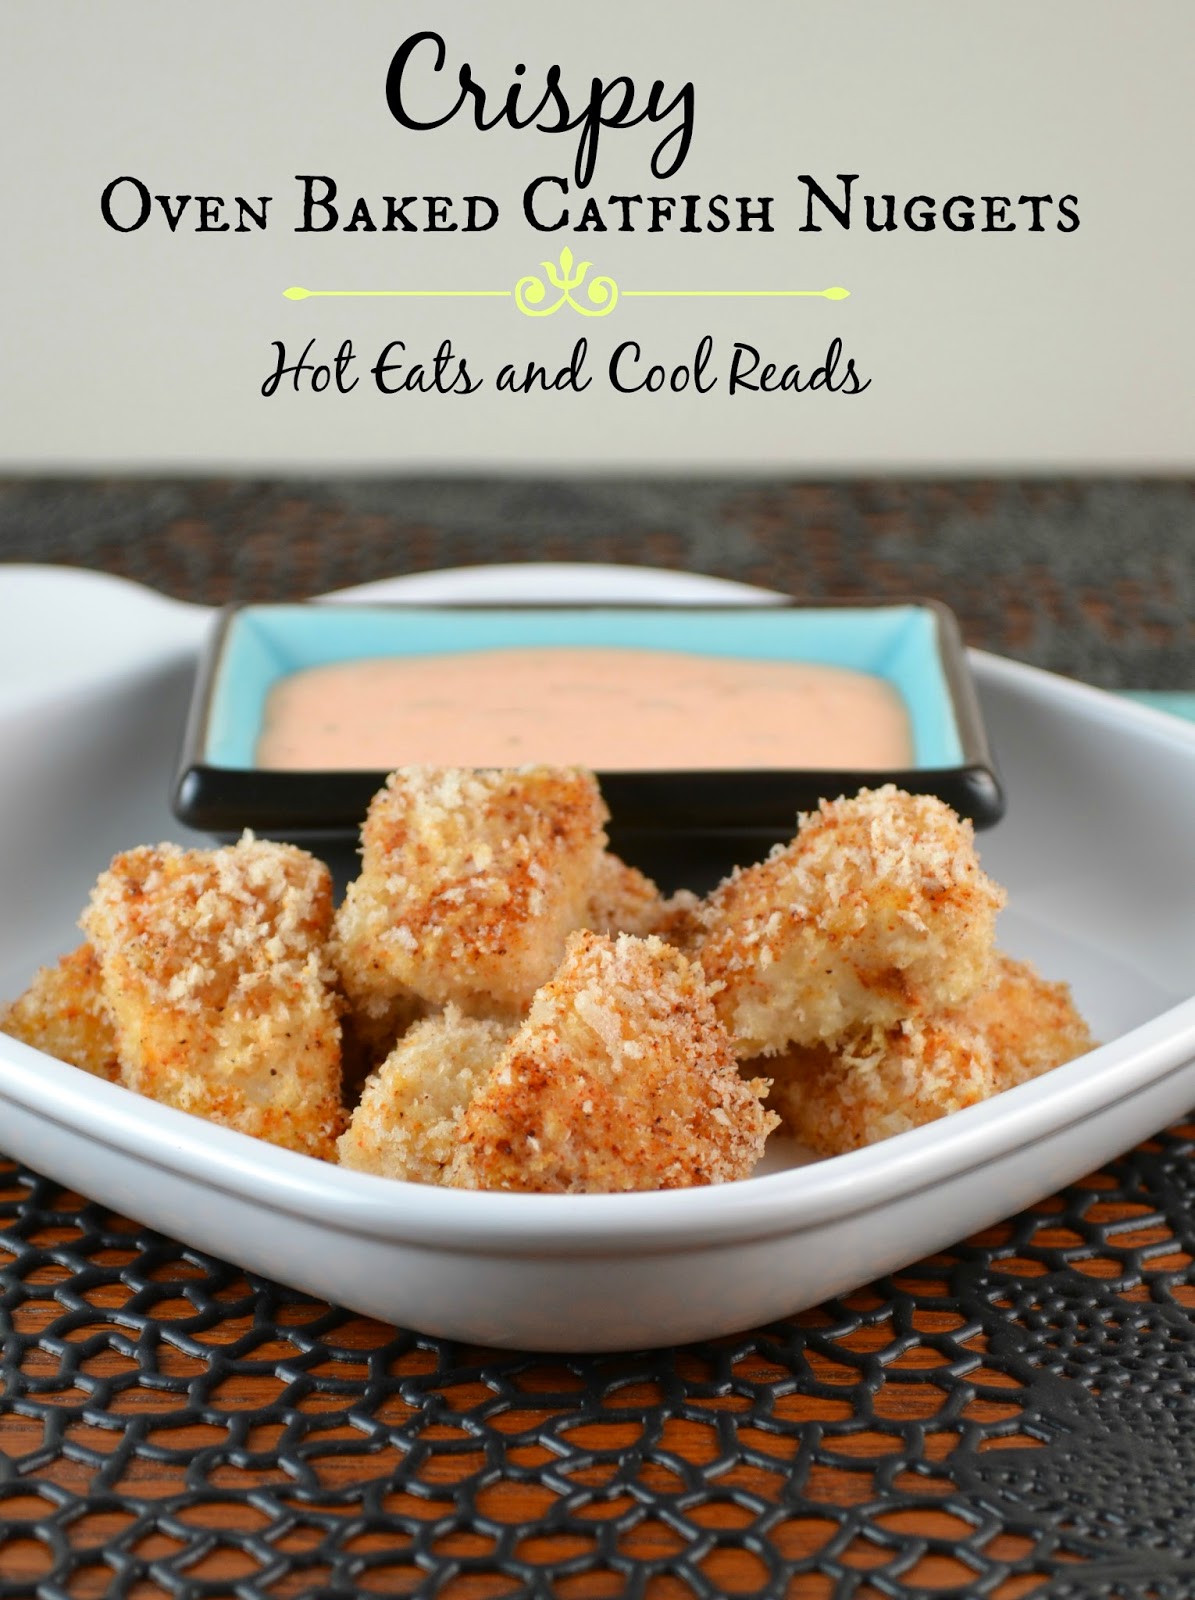 These Crispy Oven Baked Catfish Nuggets are a great appetizer or a protein for dinner! Substitute any white fish your prefer if you dont like catfish! From Hot Eats and Cool Reads!